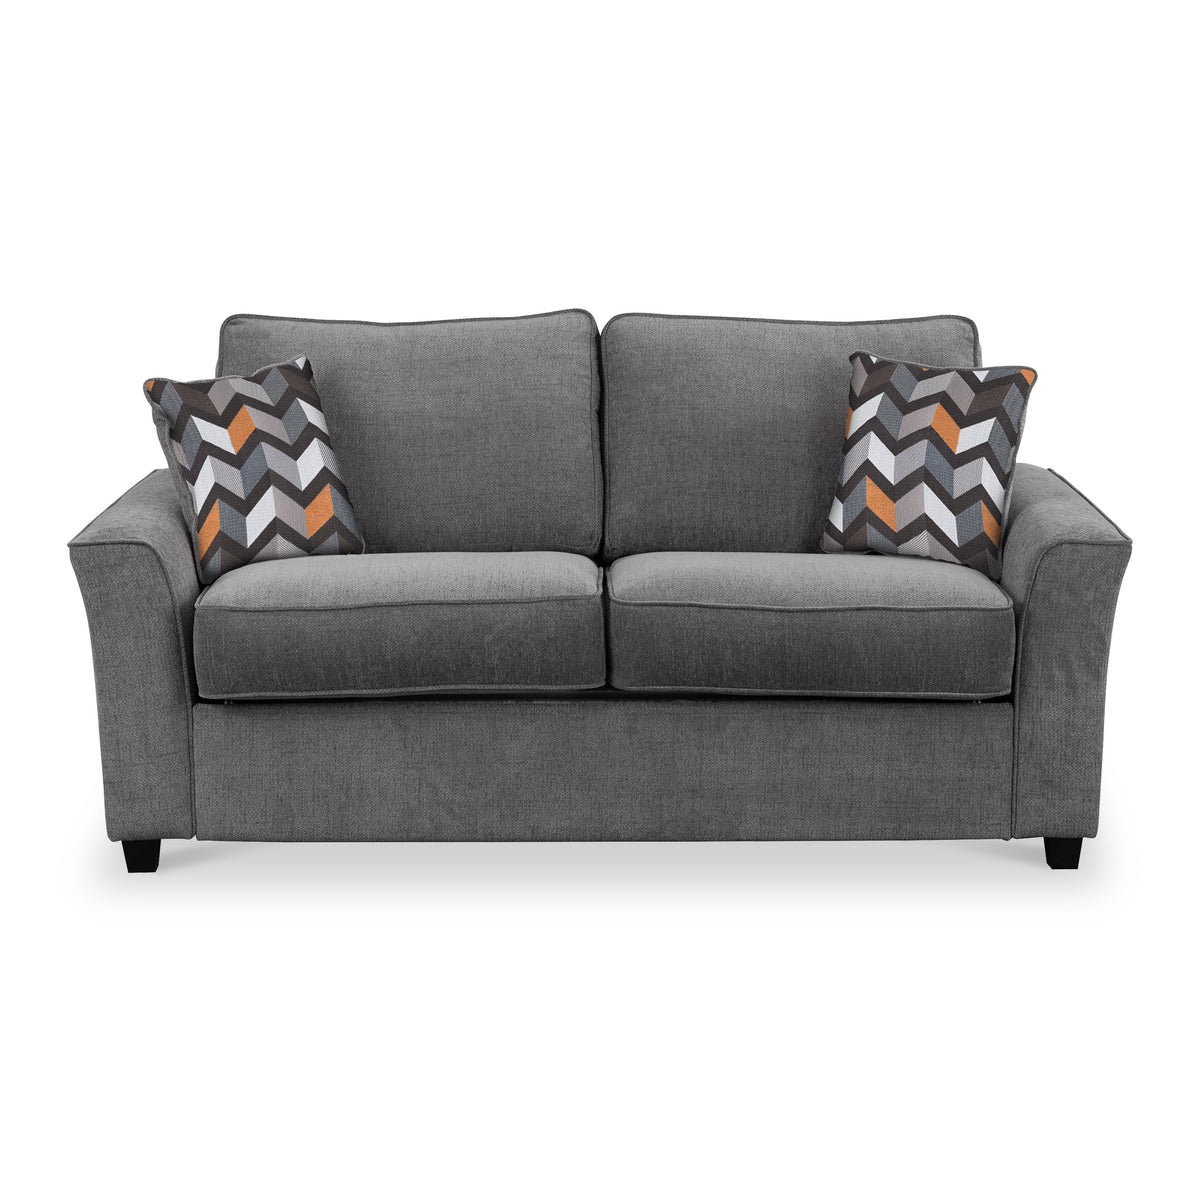 Boston 2 Seater Sofabed in Charcoal with Morelisa Charcoal Cushions by Roseland Furniture